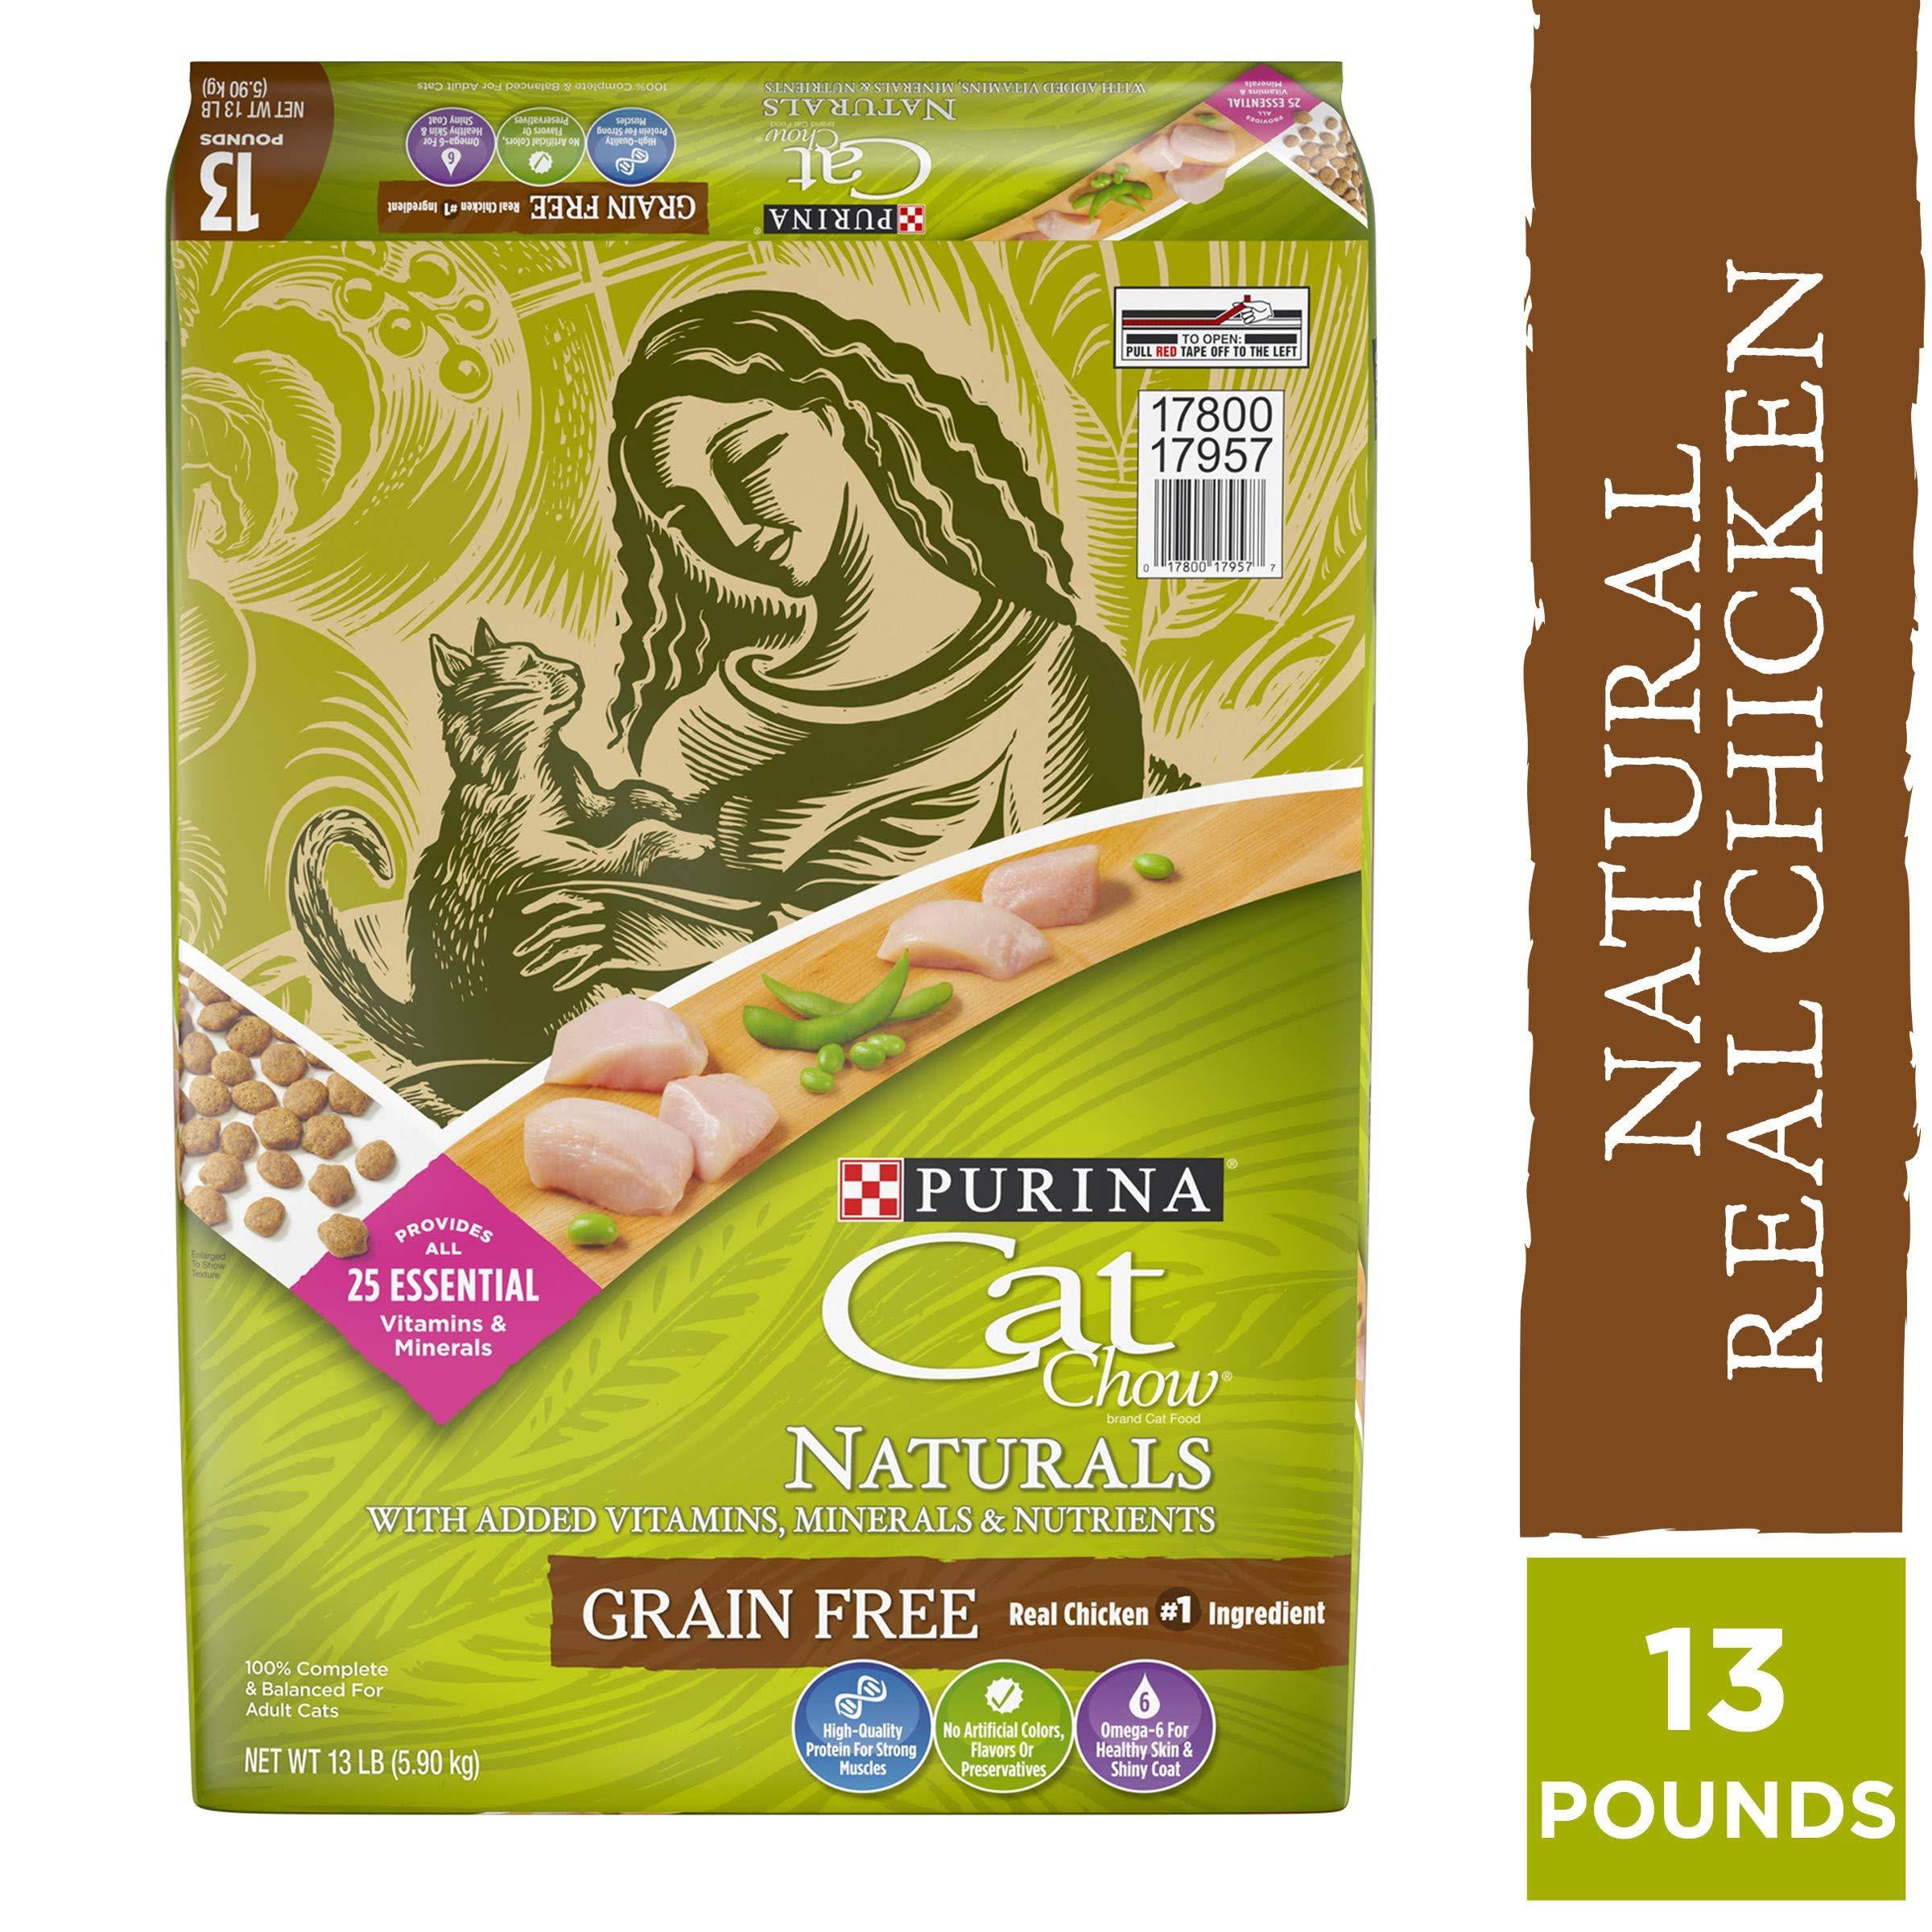 Purina Cat Chow Grain Free, Natural Dry Cat Food, Naturals with Real Chicken - 5.9kg. Bag | Cats | Delivery guaranteed | Best Price Guarantee